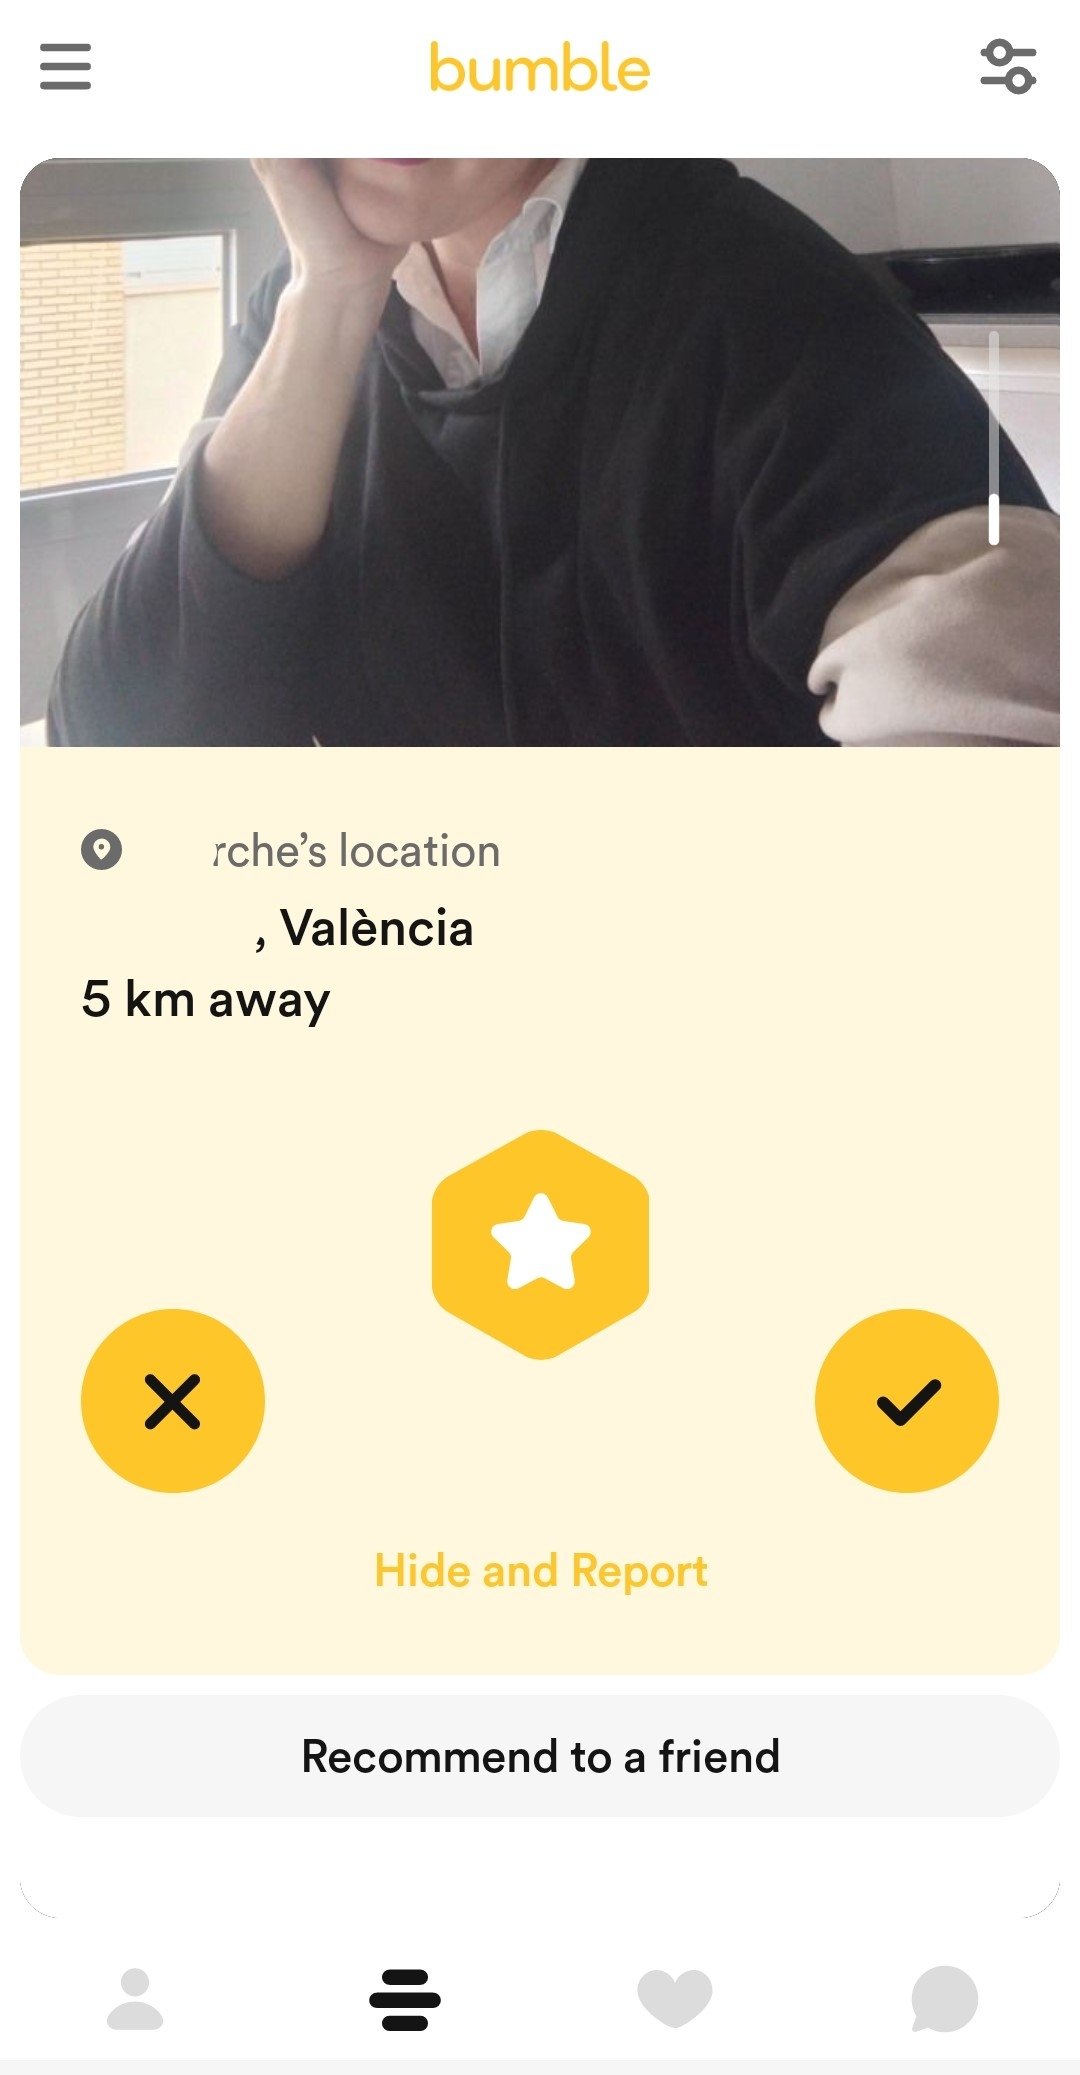 bumble dating app download w/d hookup